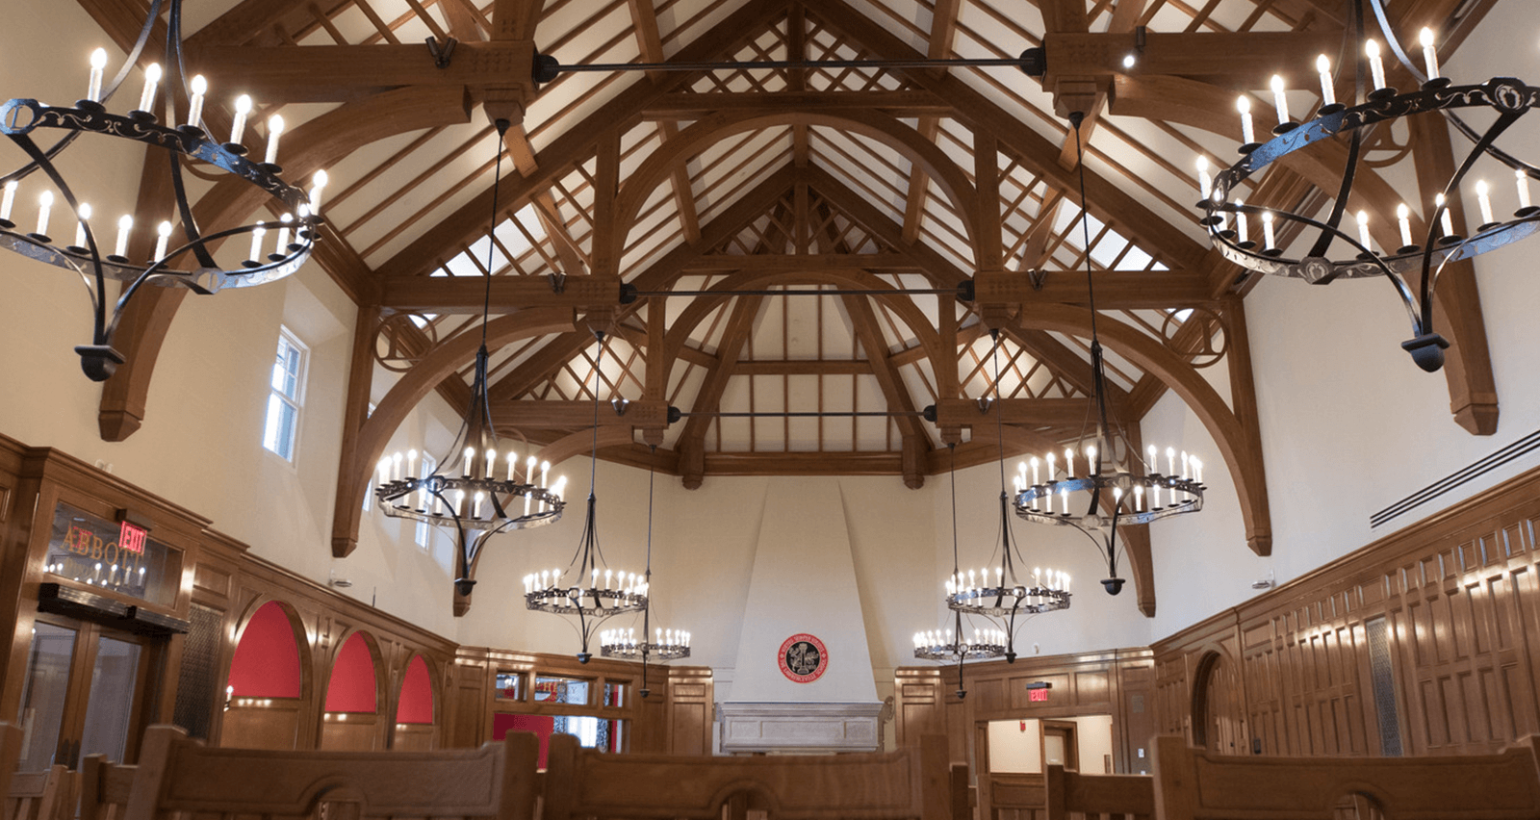 Lawrenceville School Assembly Room, Princeton NJ; Clemens Construction; Voith and Mactavish Architects